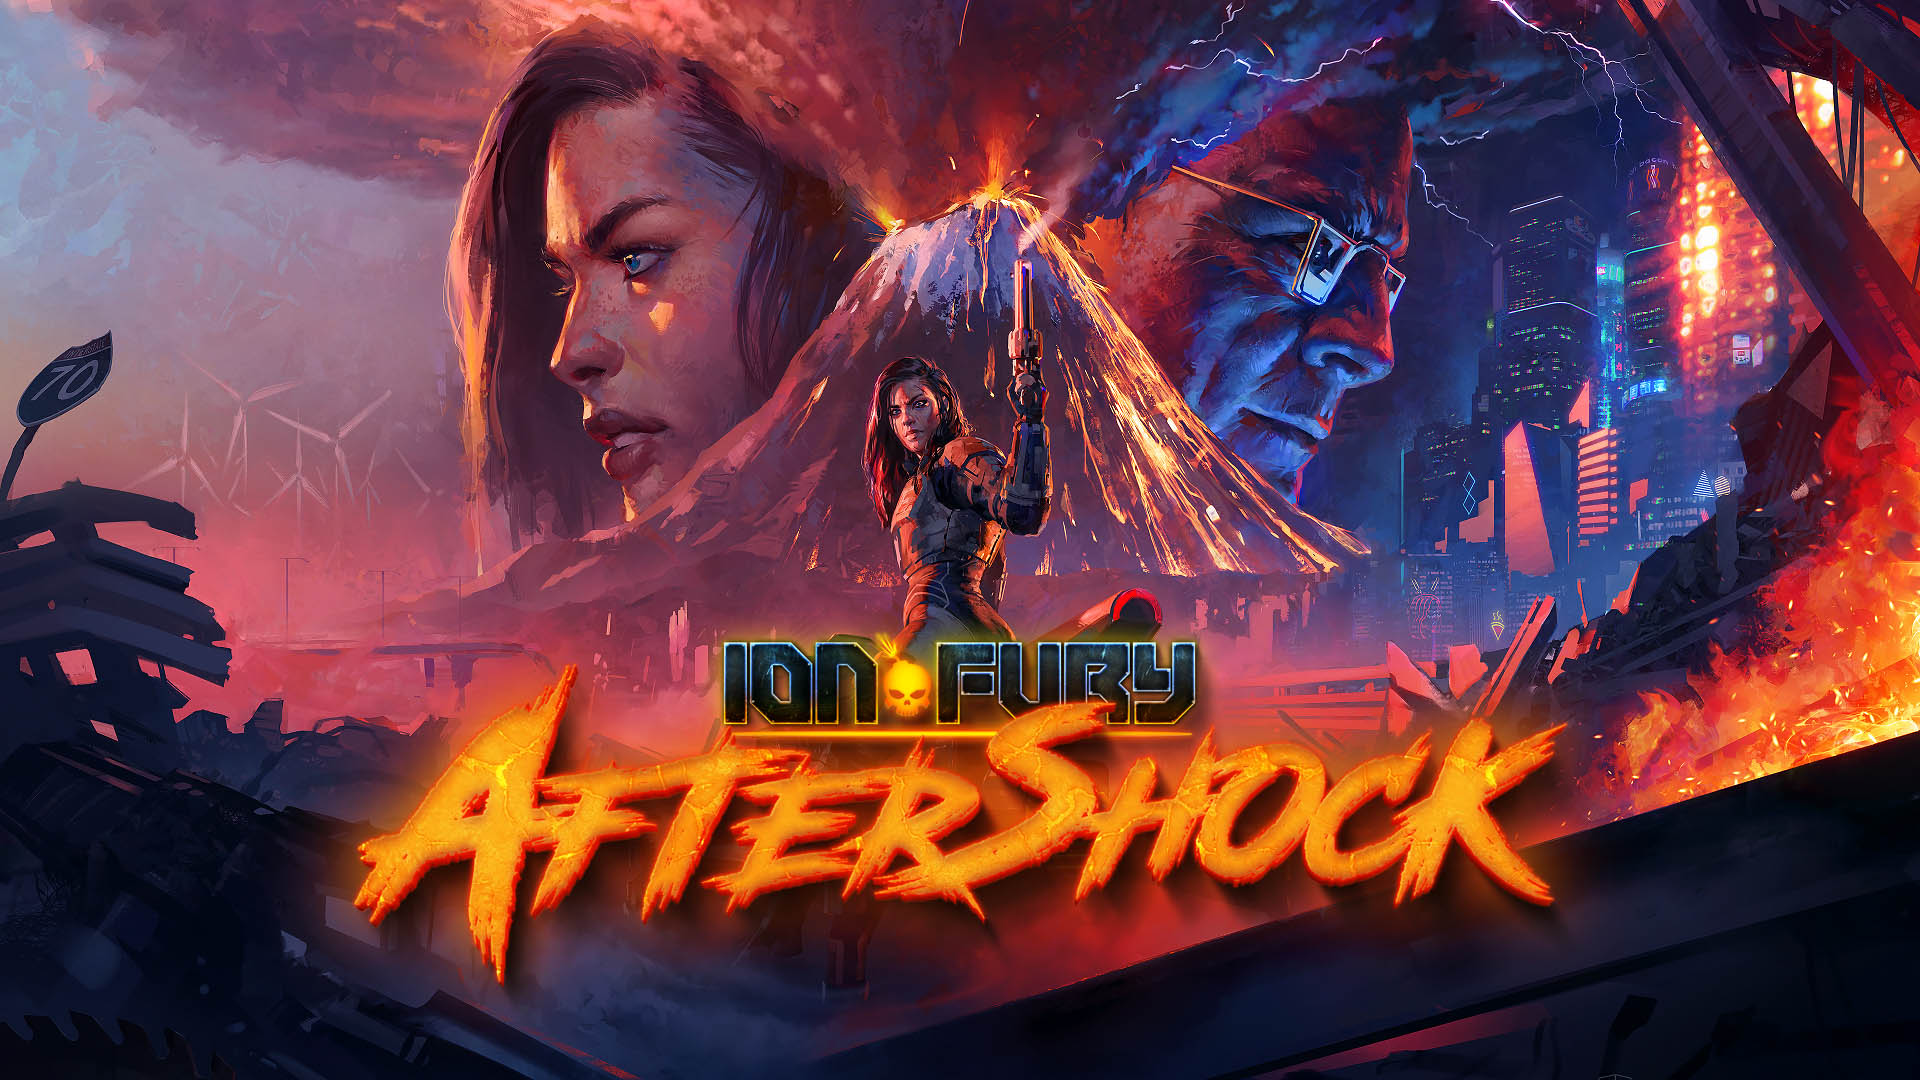 Ion Fury expansion “Aftershock” finally launches in October